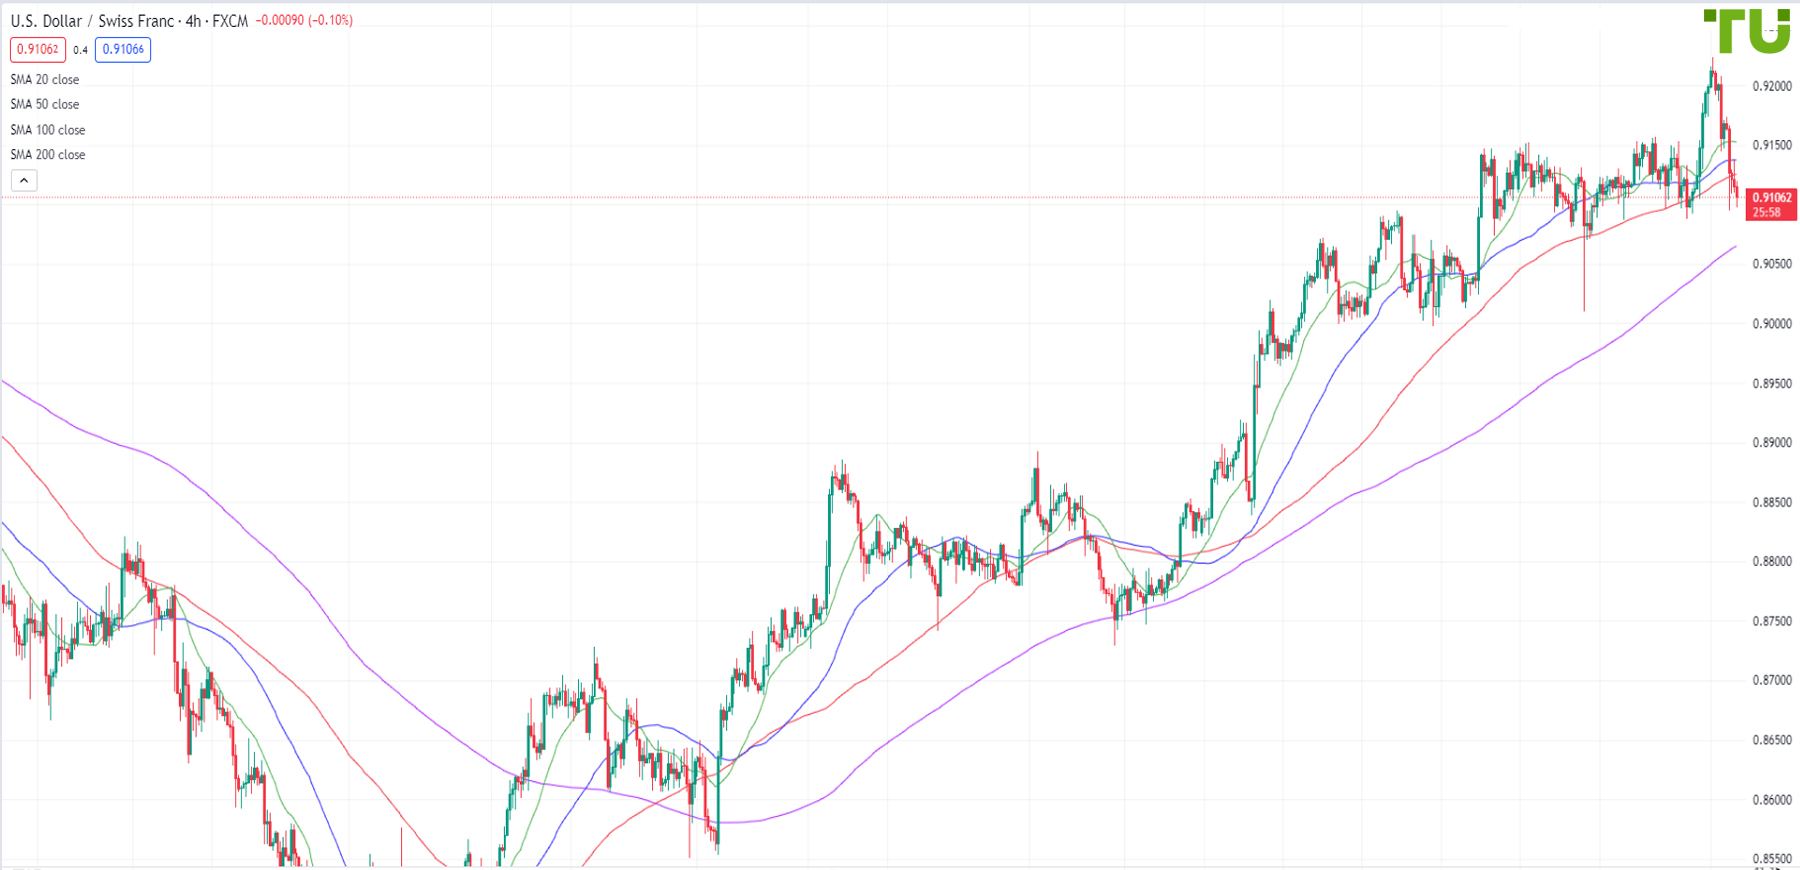 USD/CHF dropped to 0.9100 support